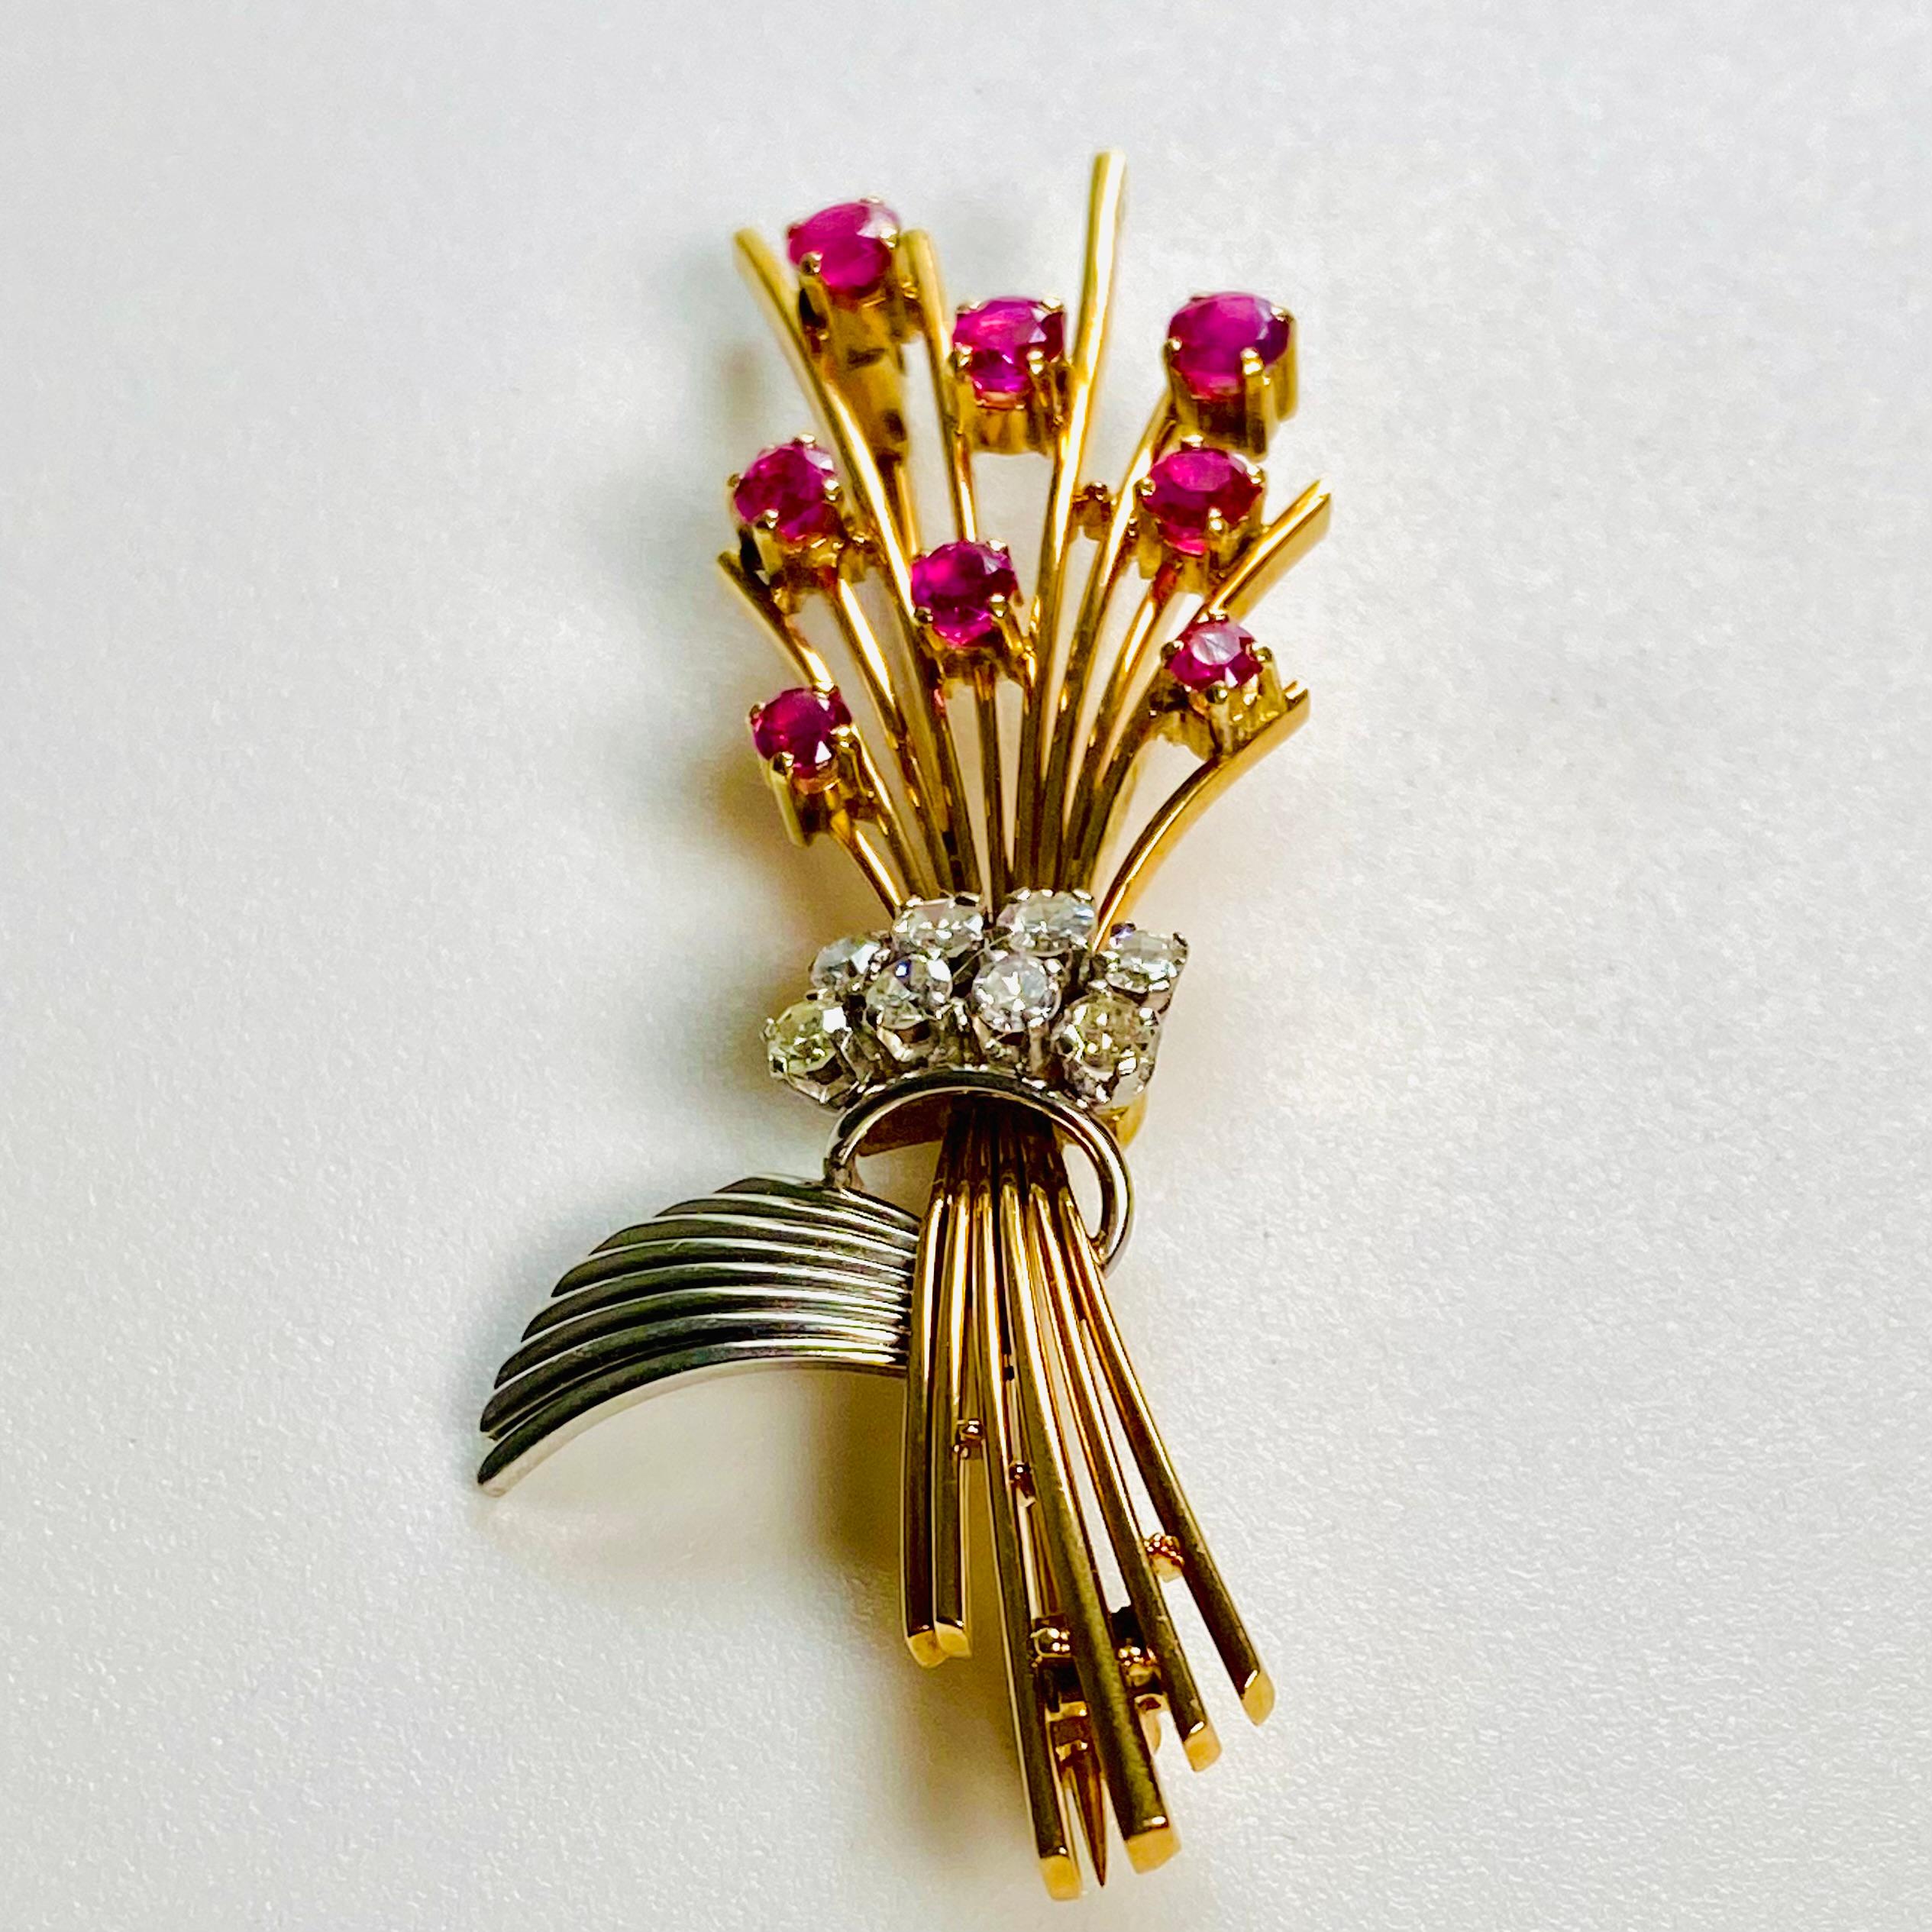 Introducing our exquisite Vintage Platinum 18 Karat Gold Foliate Brooch, adorned with 8 lustrous Rubies weighing approximately 1.00 carat and 8 Diamonds weighing approximately 0.60 carats , a timeless piece of artistry that embodies elegance and